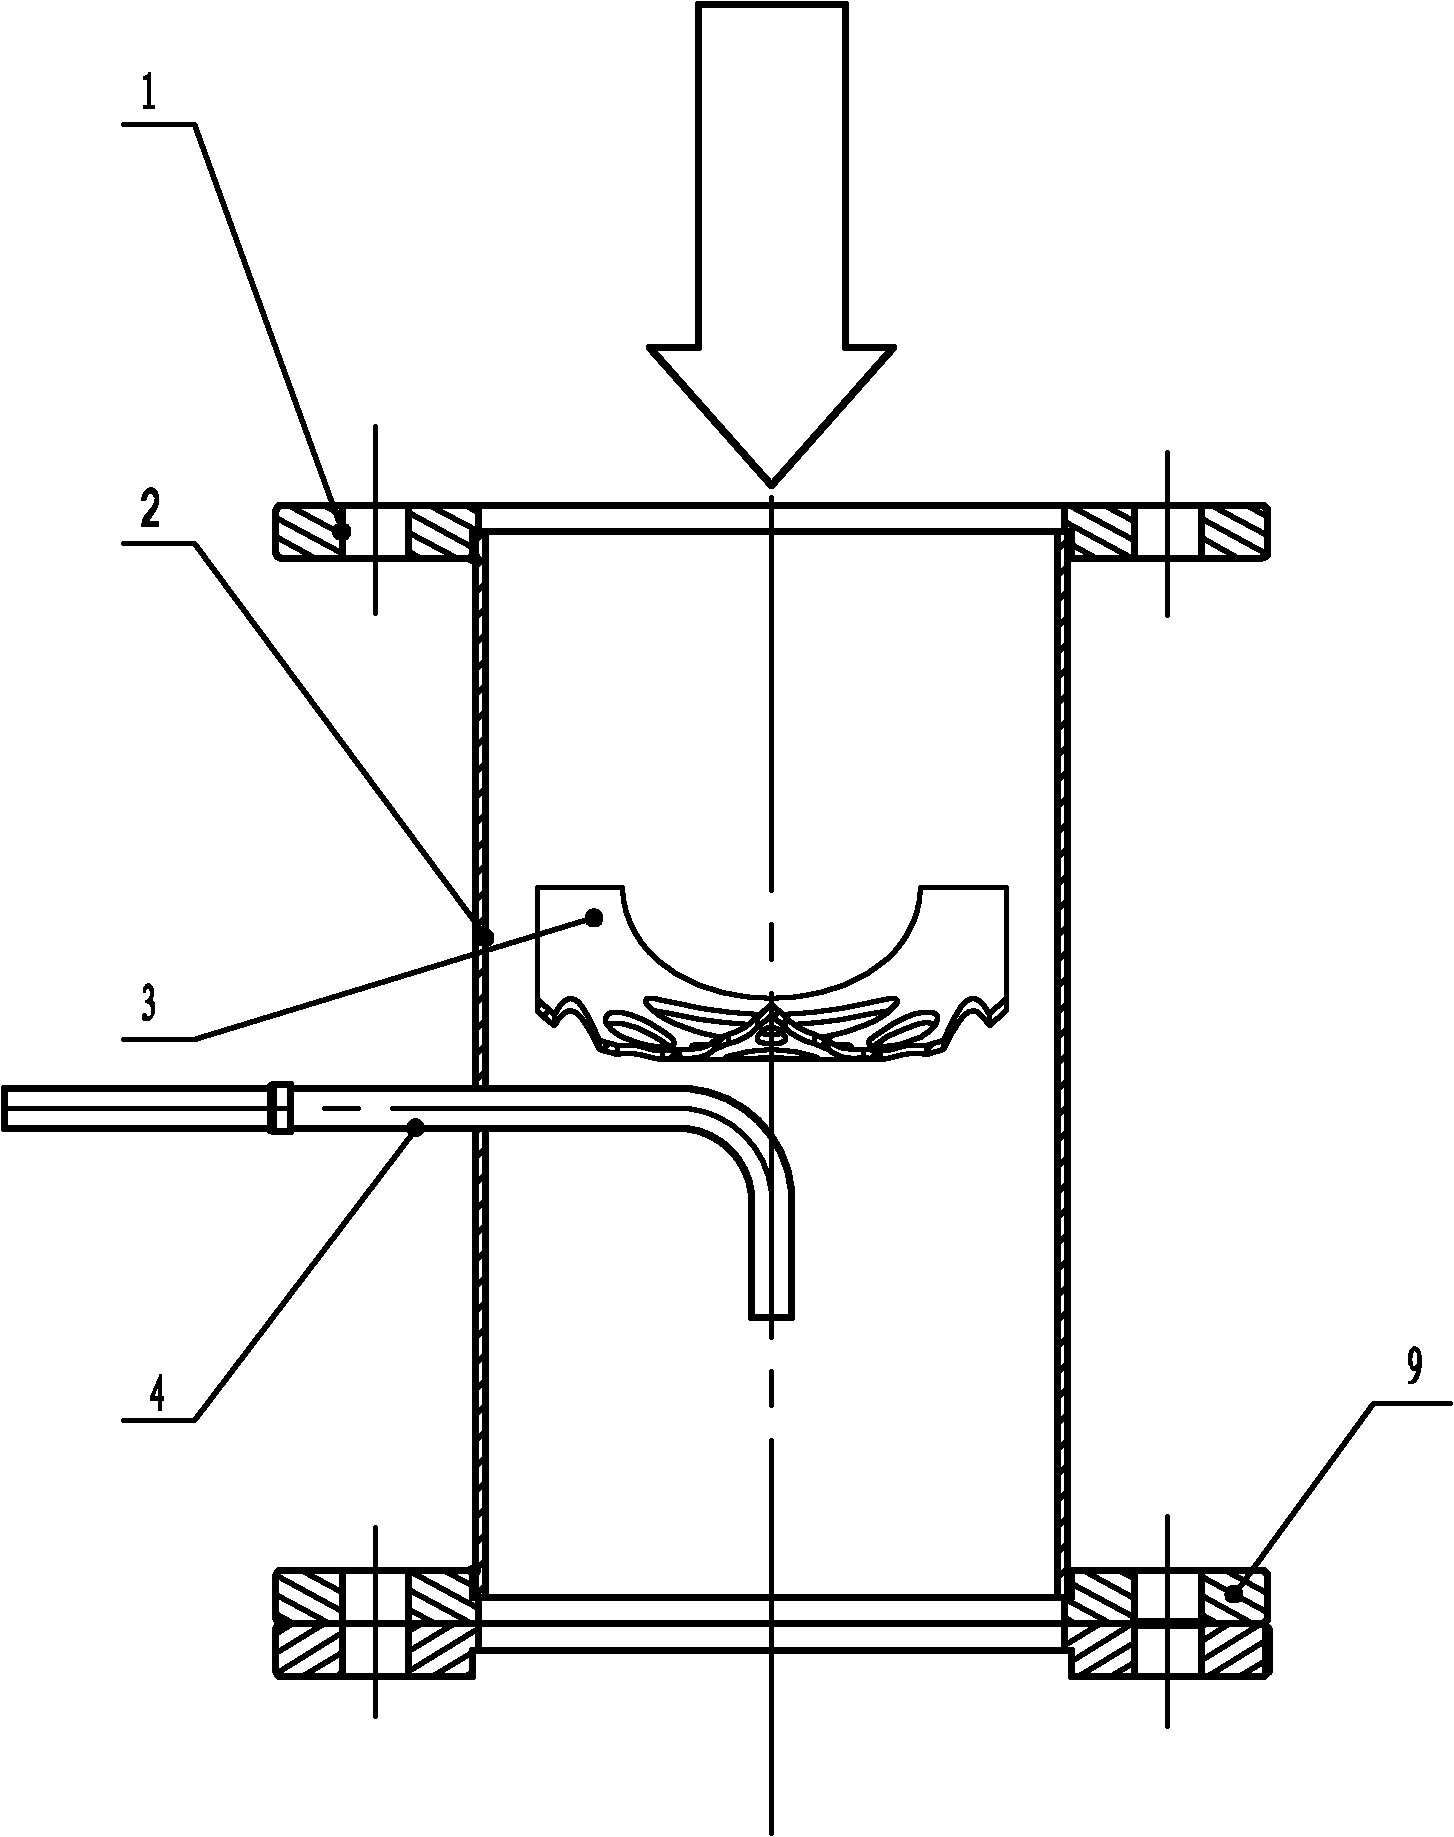 Static mixer for diesel engine urea selective catalytic reduction device